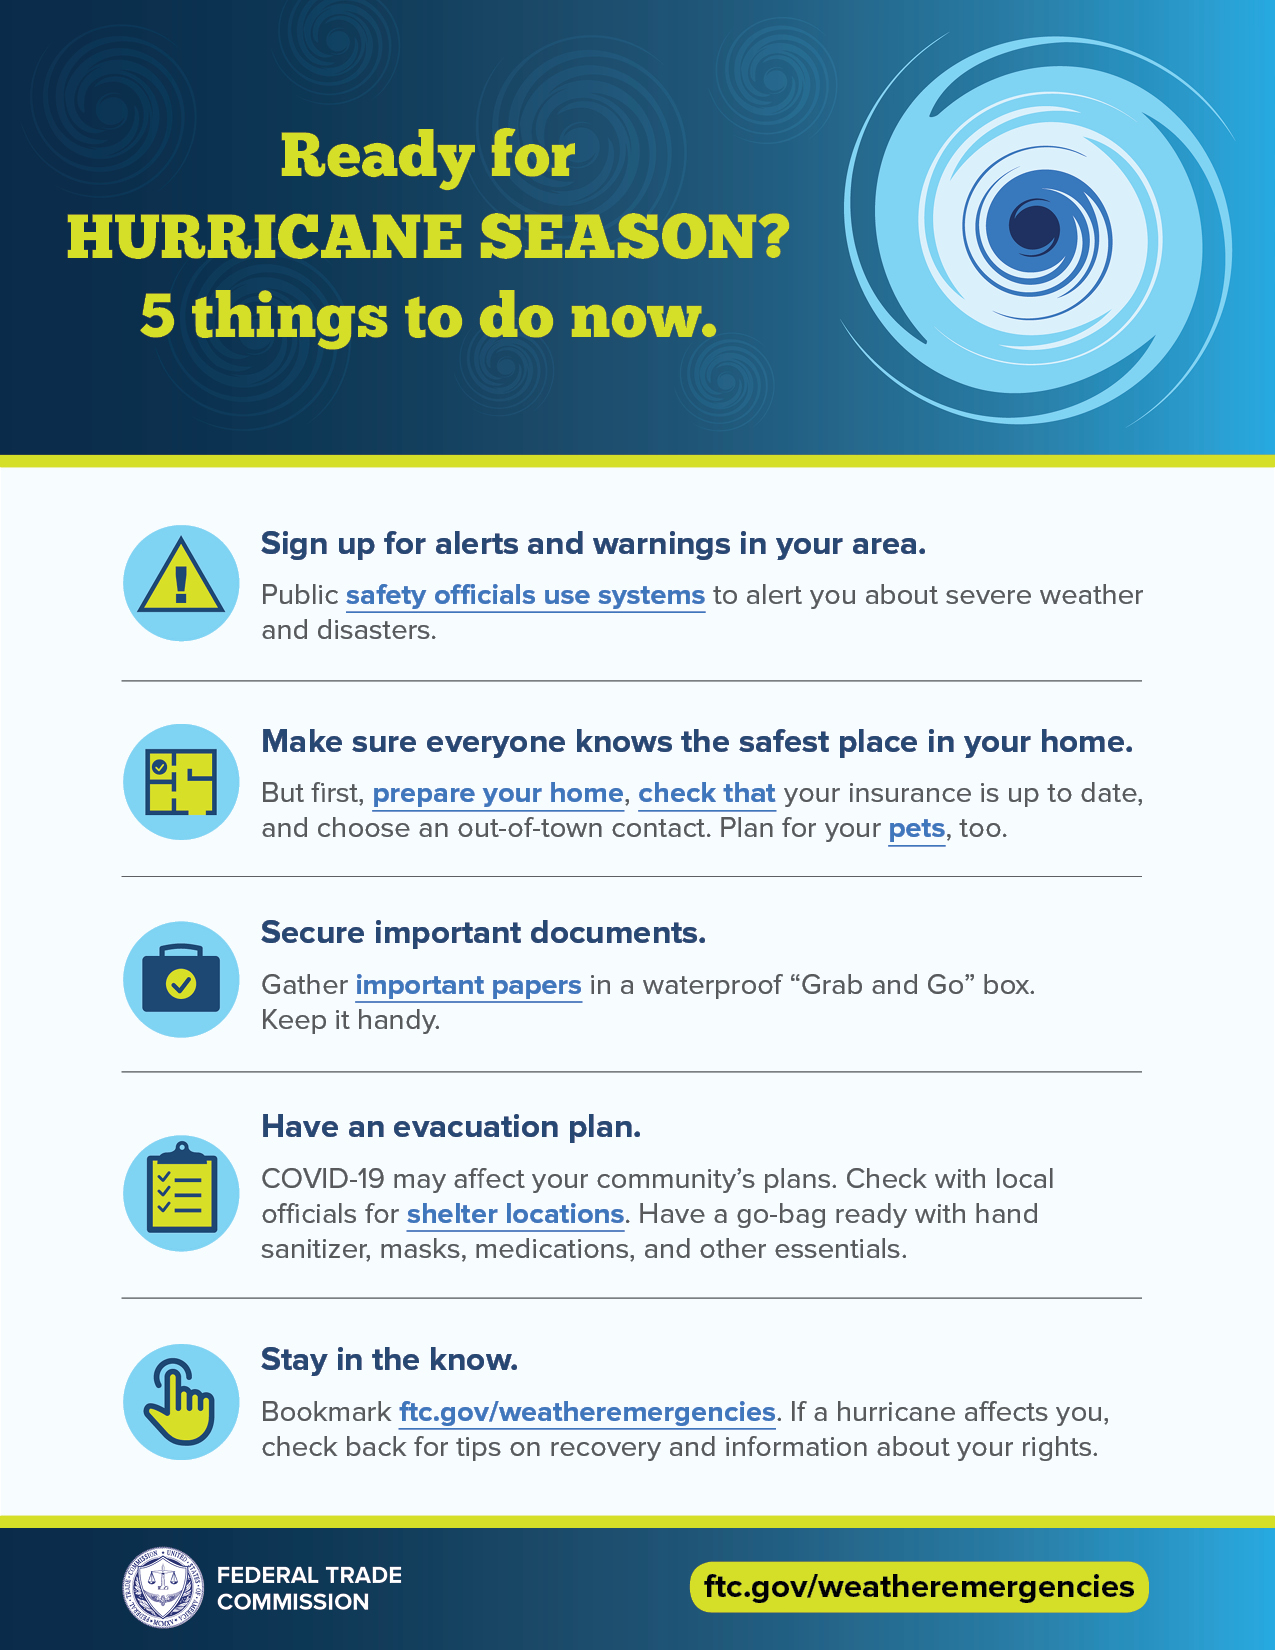 Ready for Hurrican Season? 5 Things you can do now.